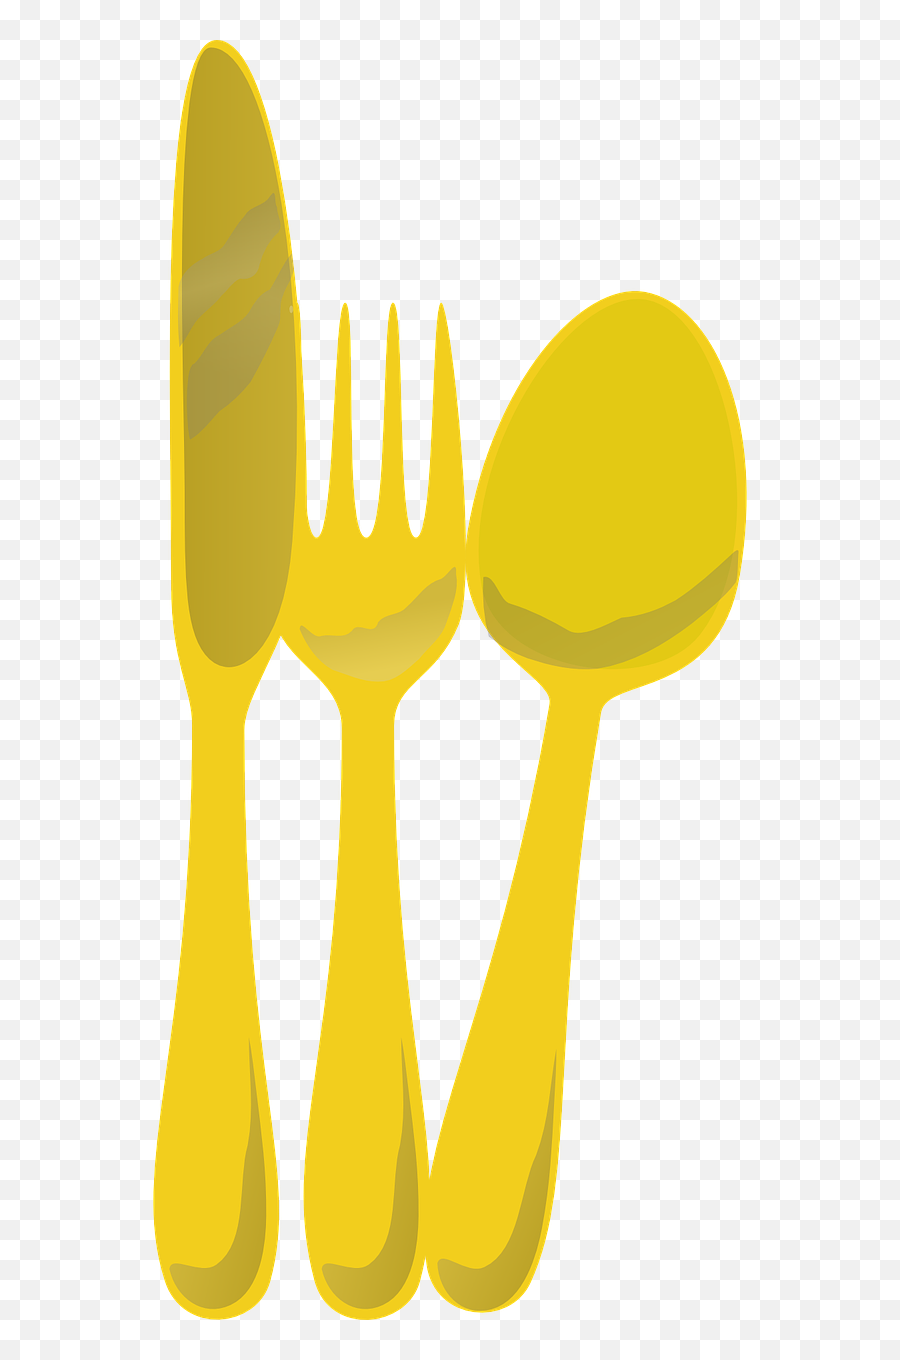 Cutlery Fork Knife - Free Vector Graphic On Pixabay Desenho De Talheres Png,Spoon And Fork Png